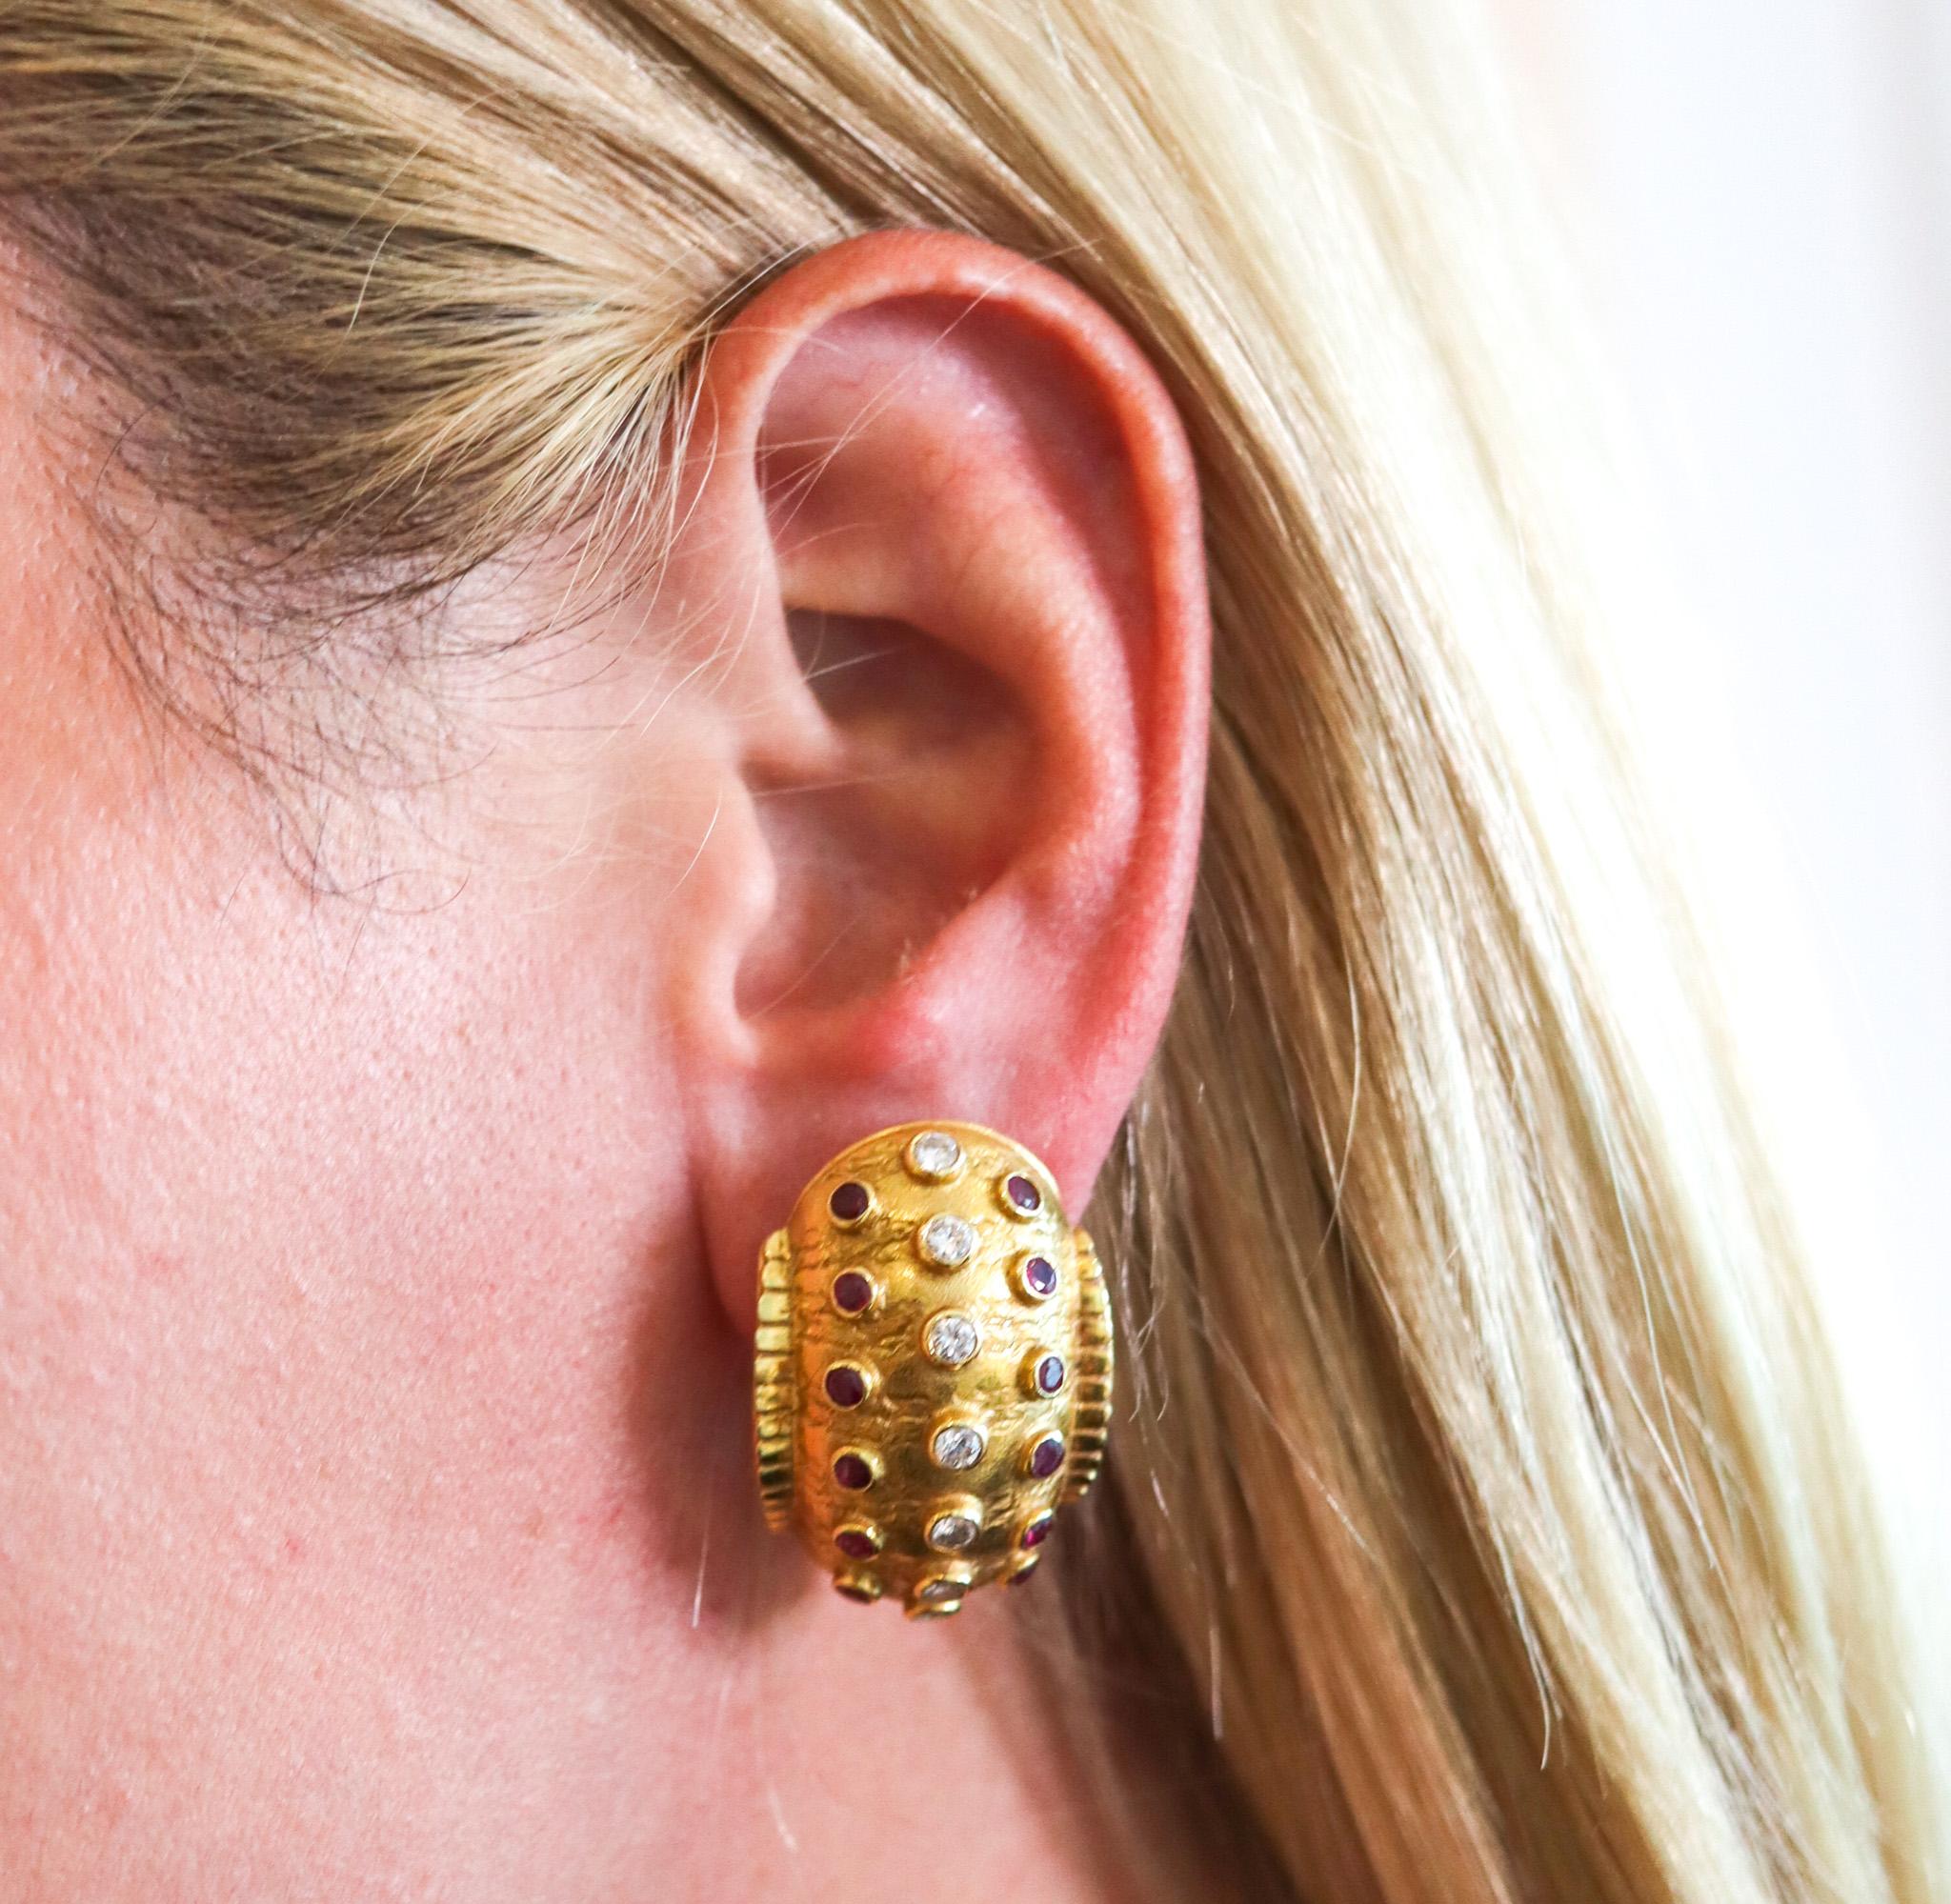 Brilliant Cut Lalaounis 1970 Clips On Earrings in 18kt Gold With 3.32ctw Diamonds and Rubies